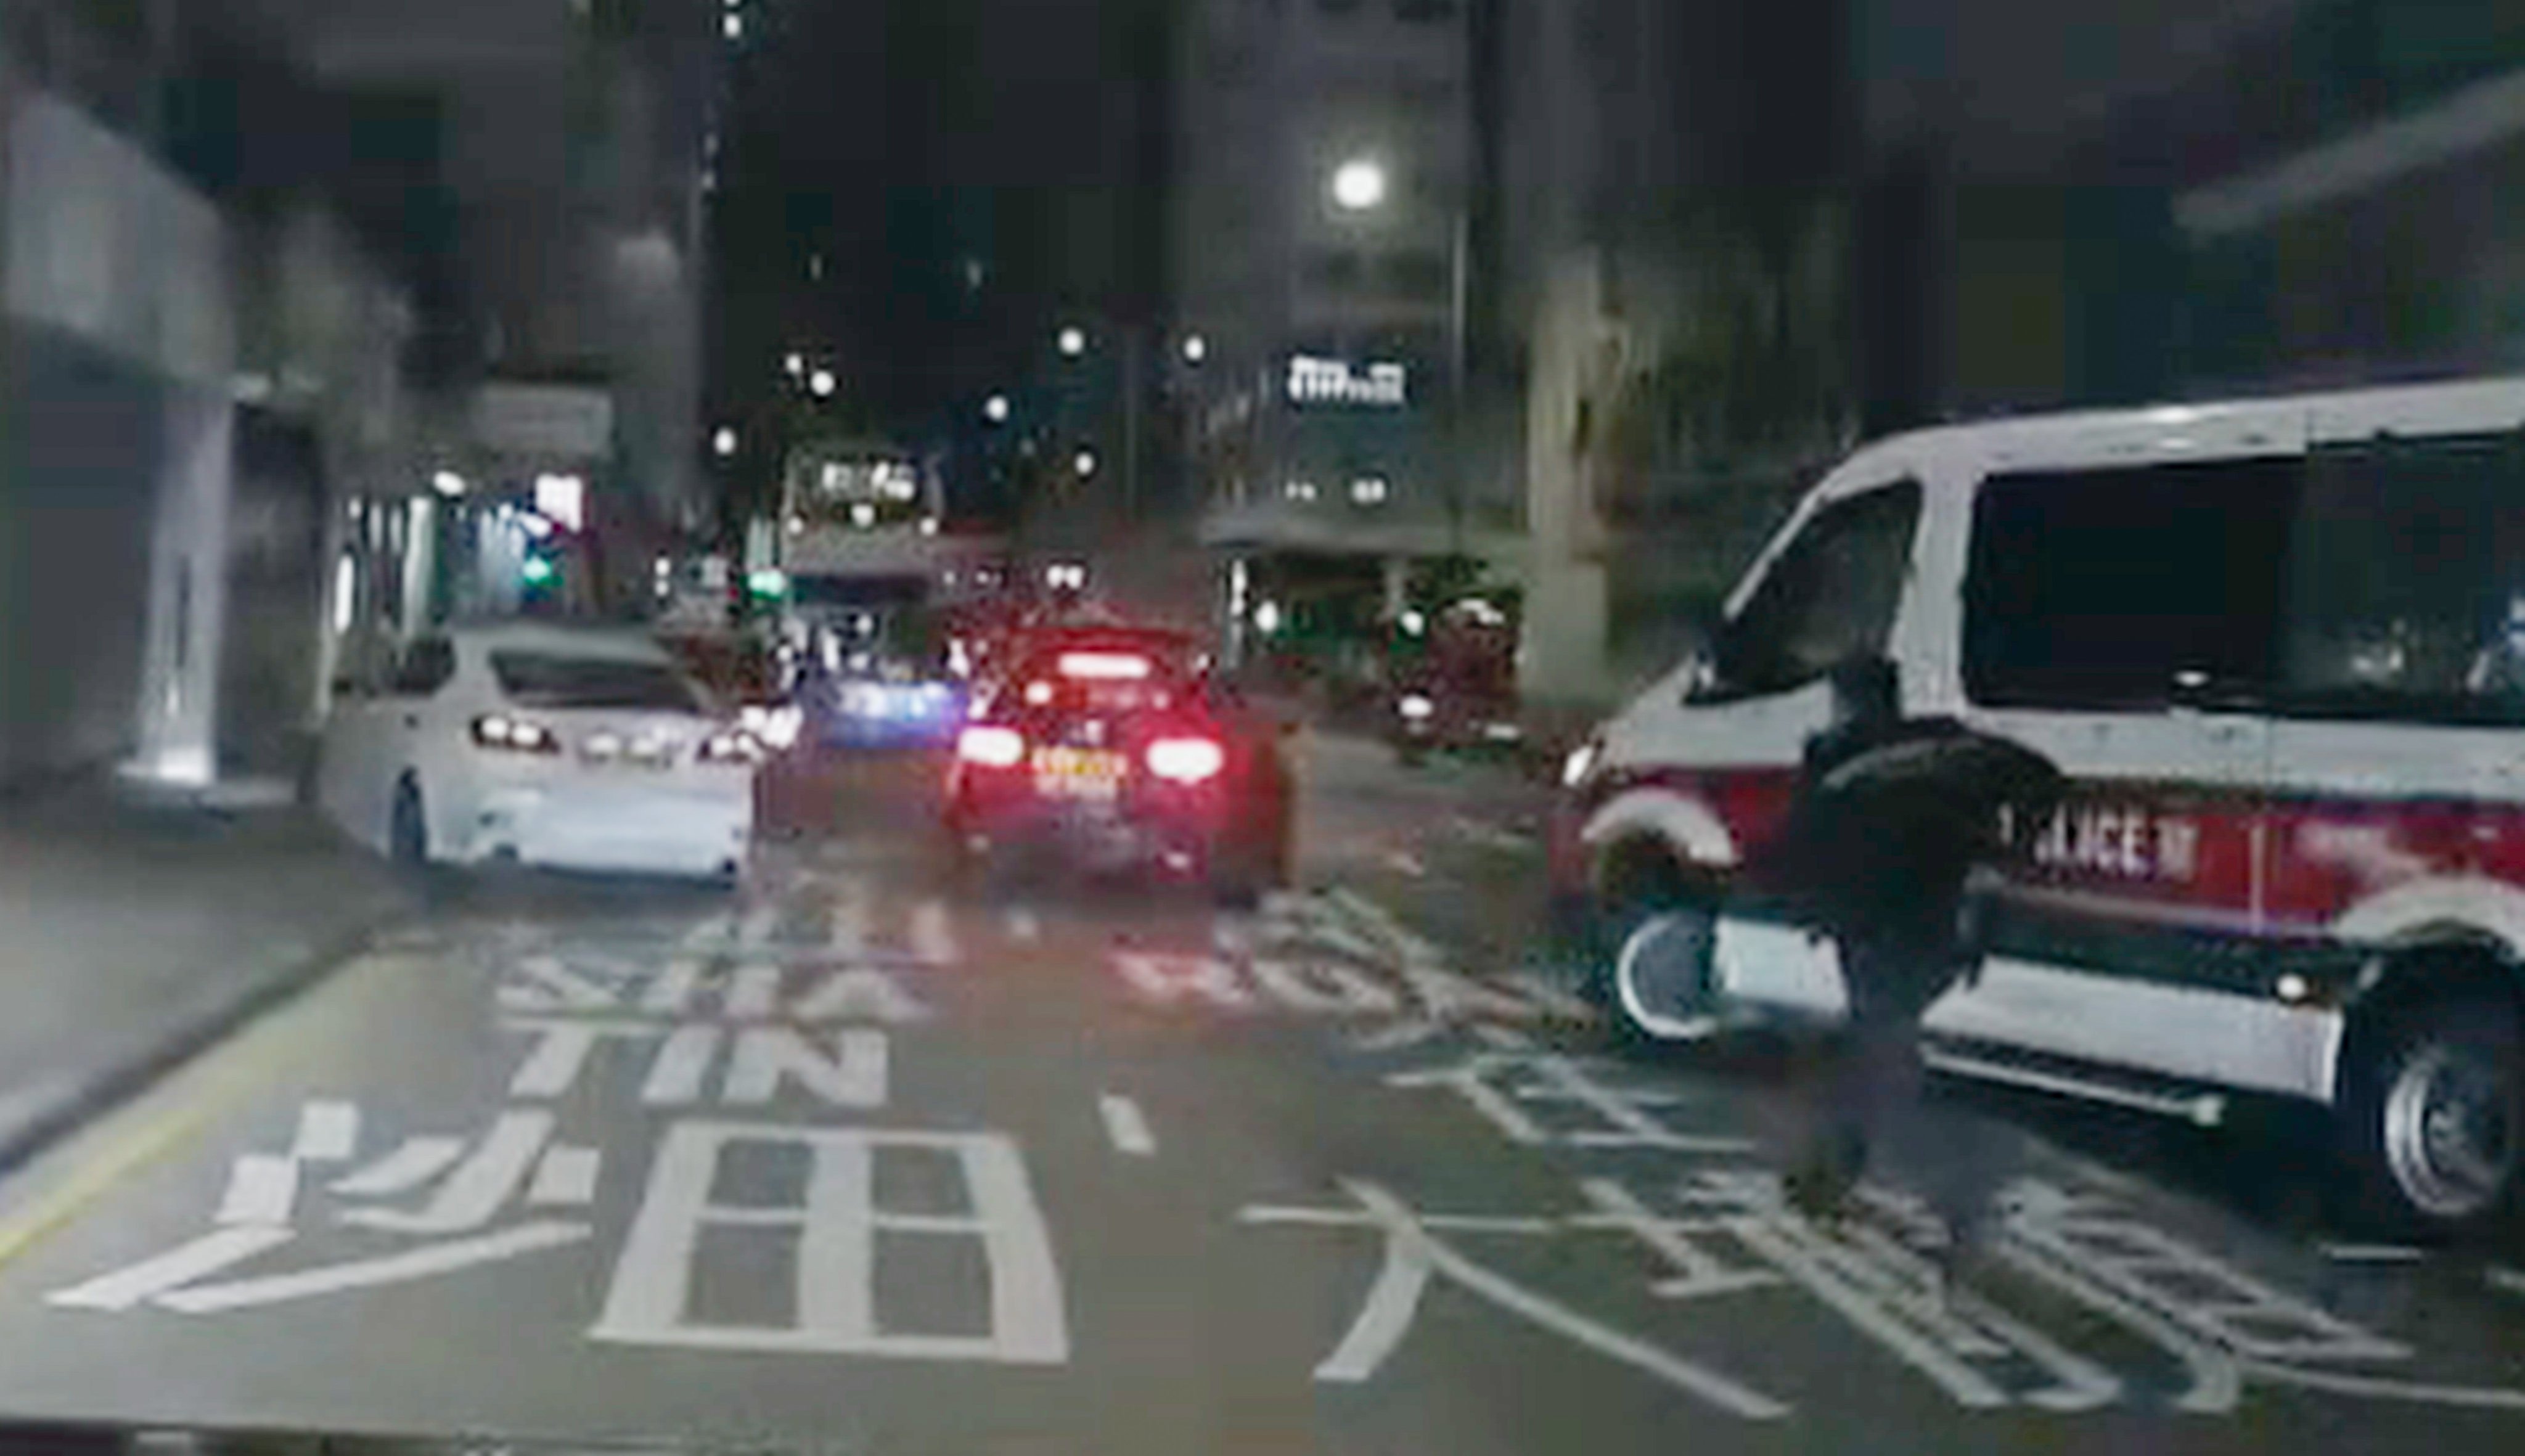 A screengrab of Thursday’s hit-and-run incident. Photo: Handout